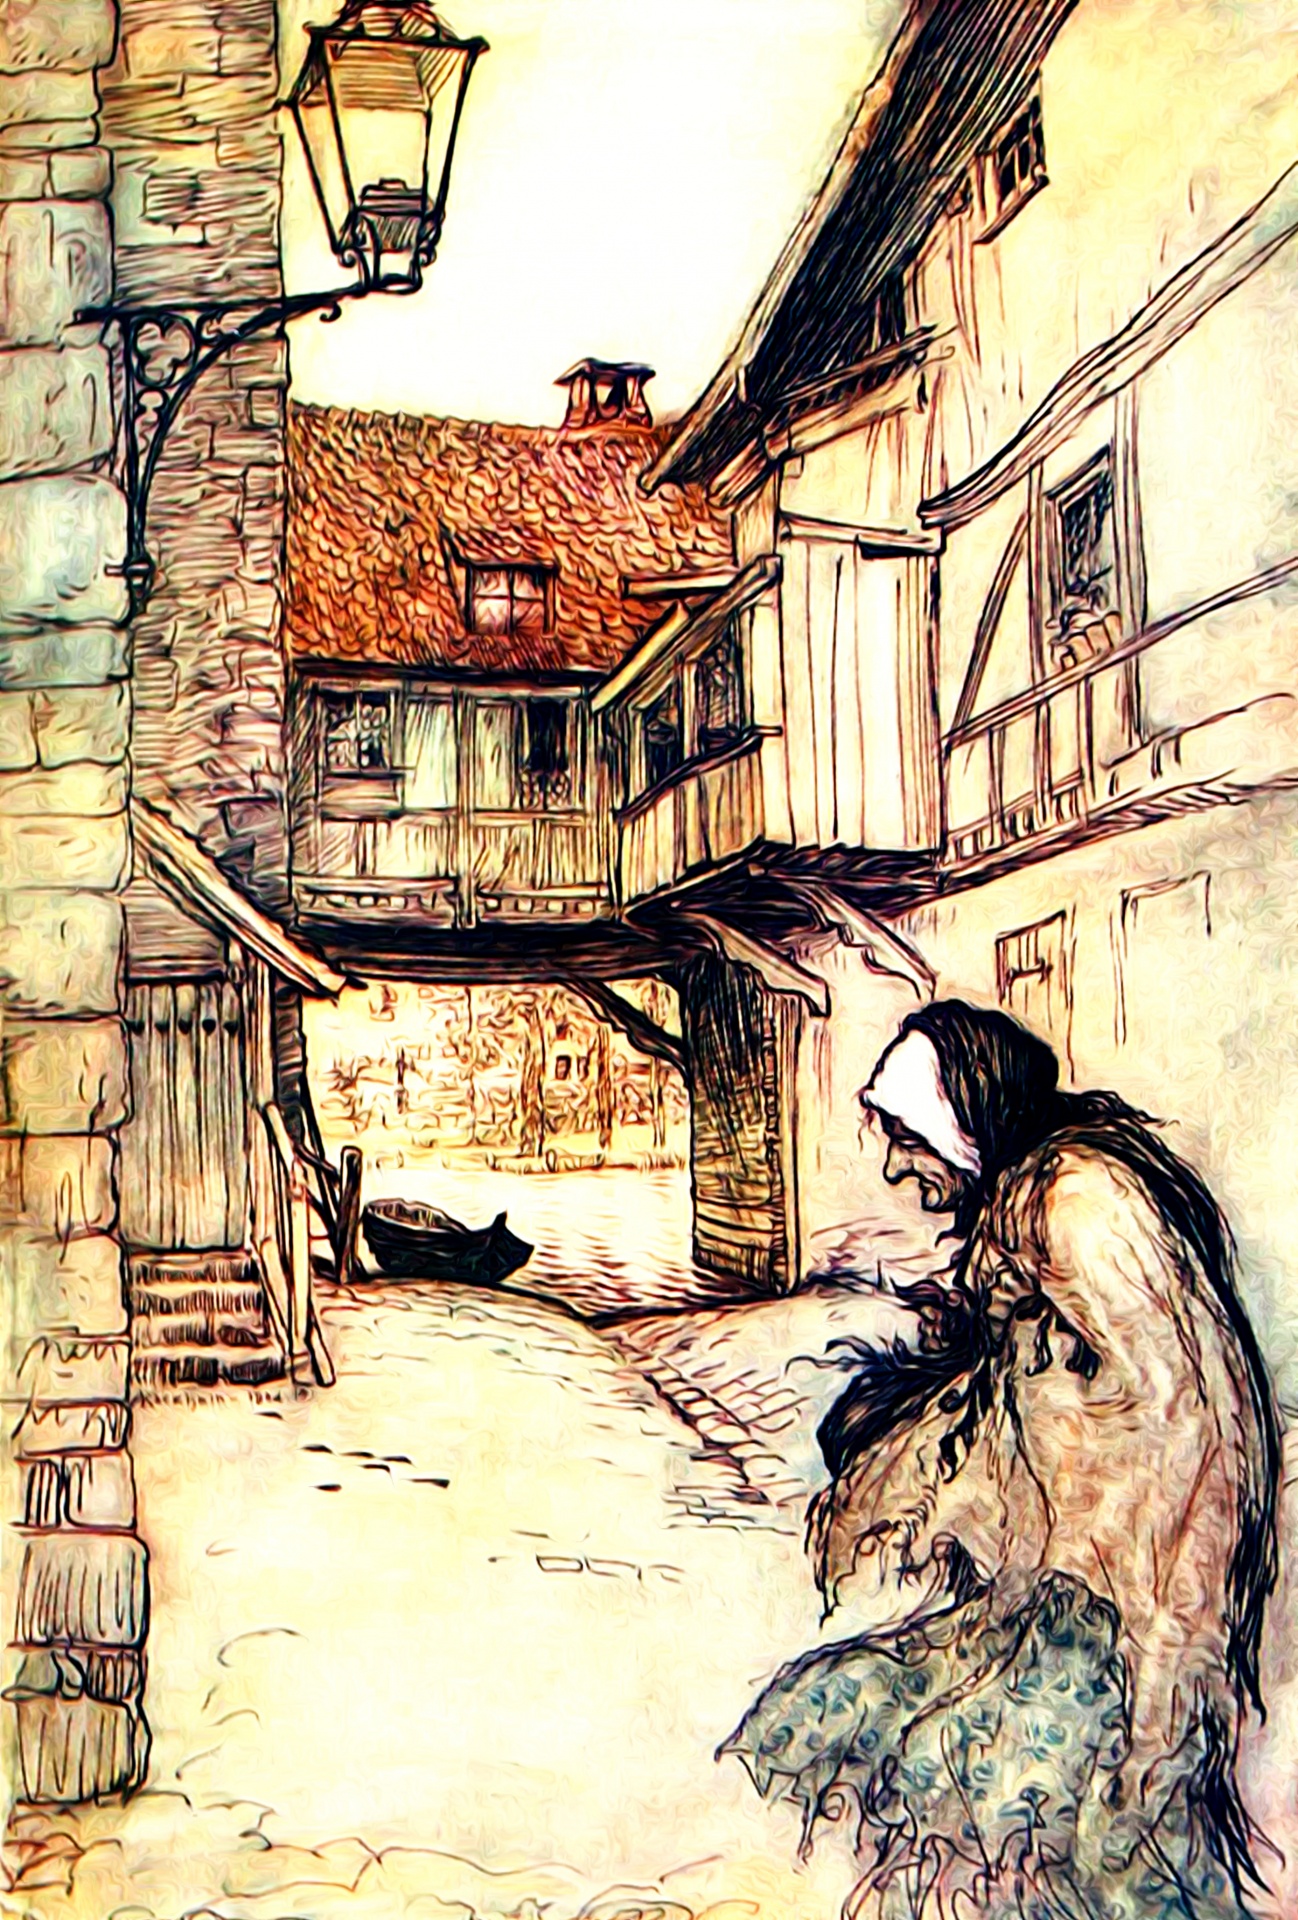 Old Woman In The Street